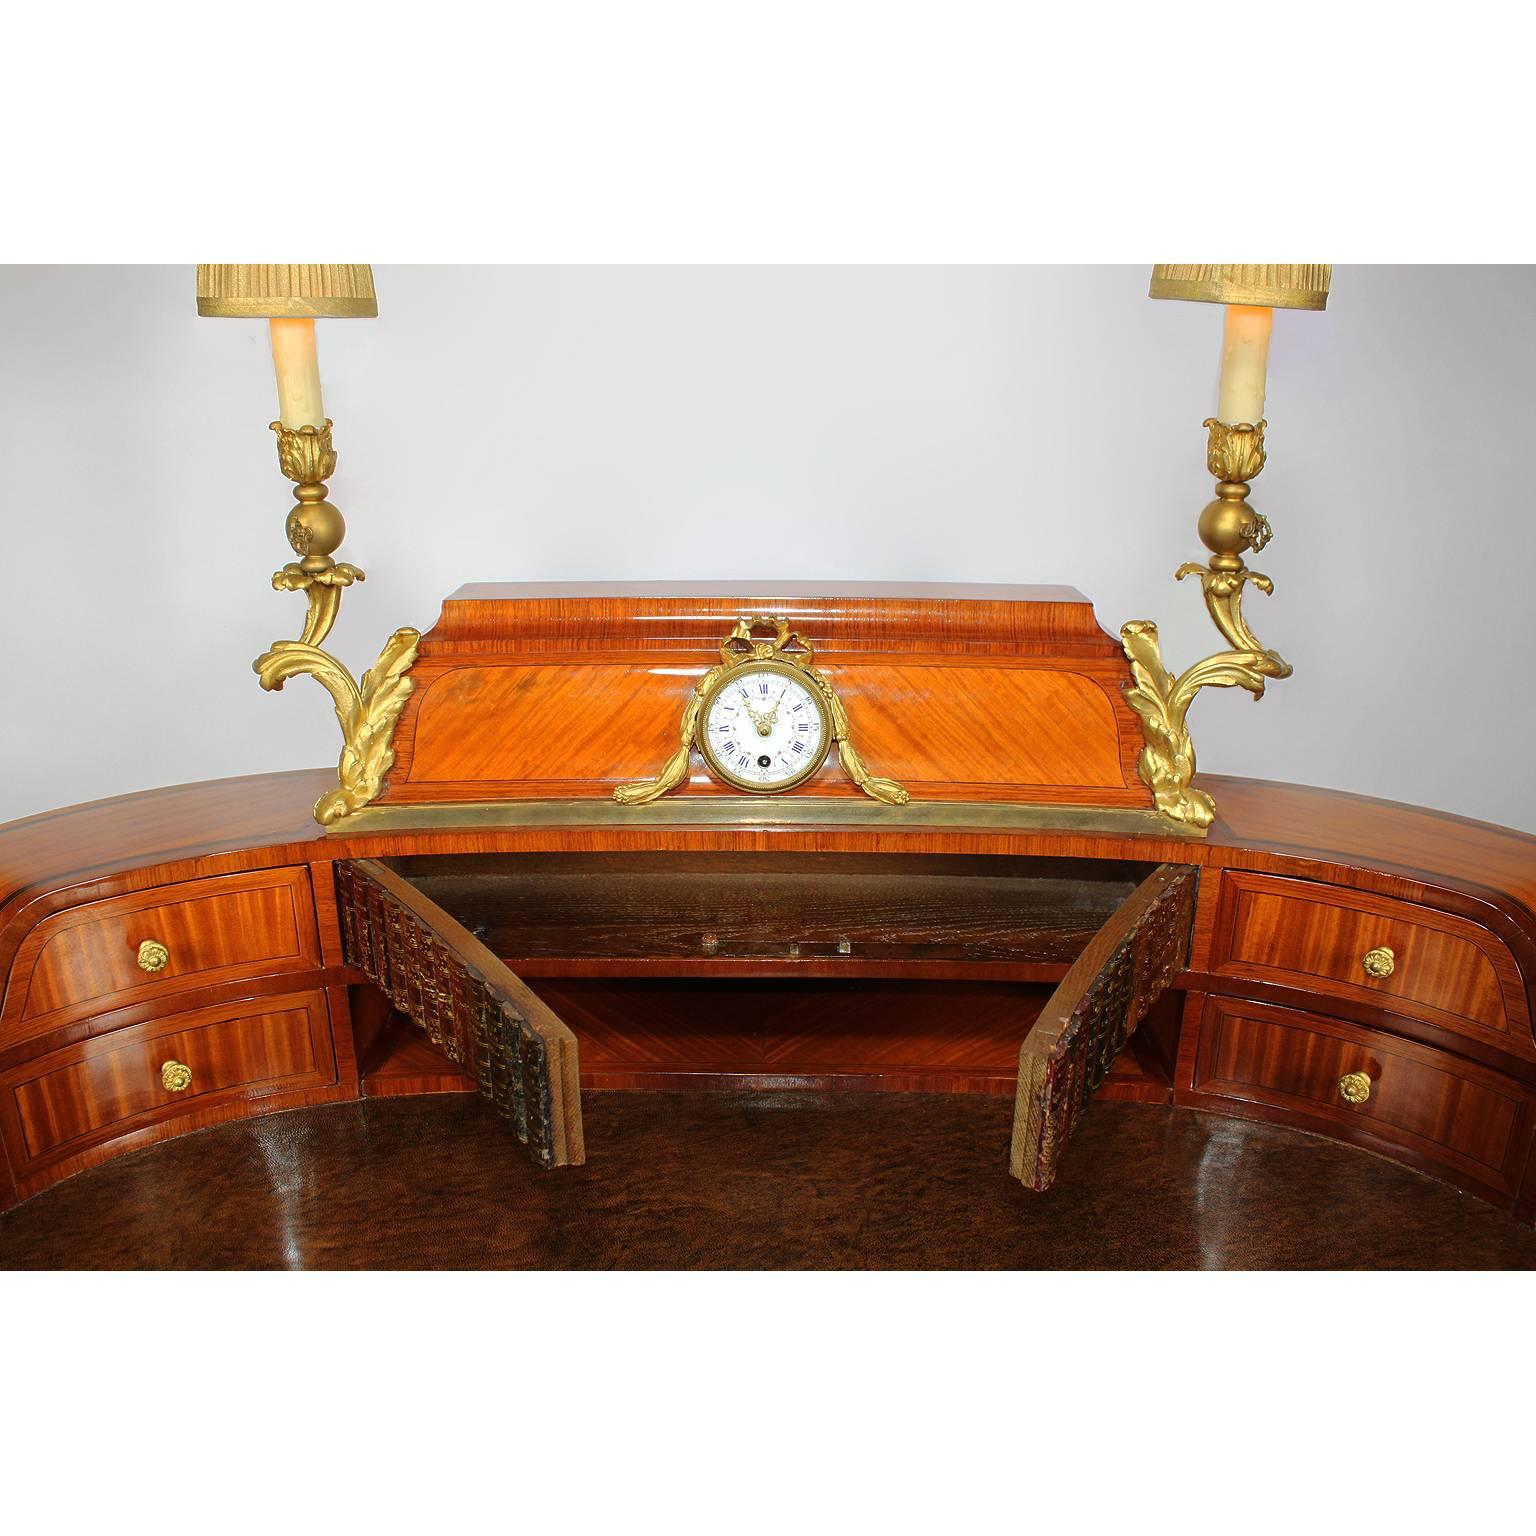 Fine French 19th Century Louis XV Style Tulipwood and Ormolu-Mounted Ladies Desk For Sale 1